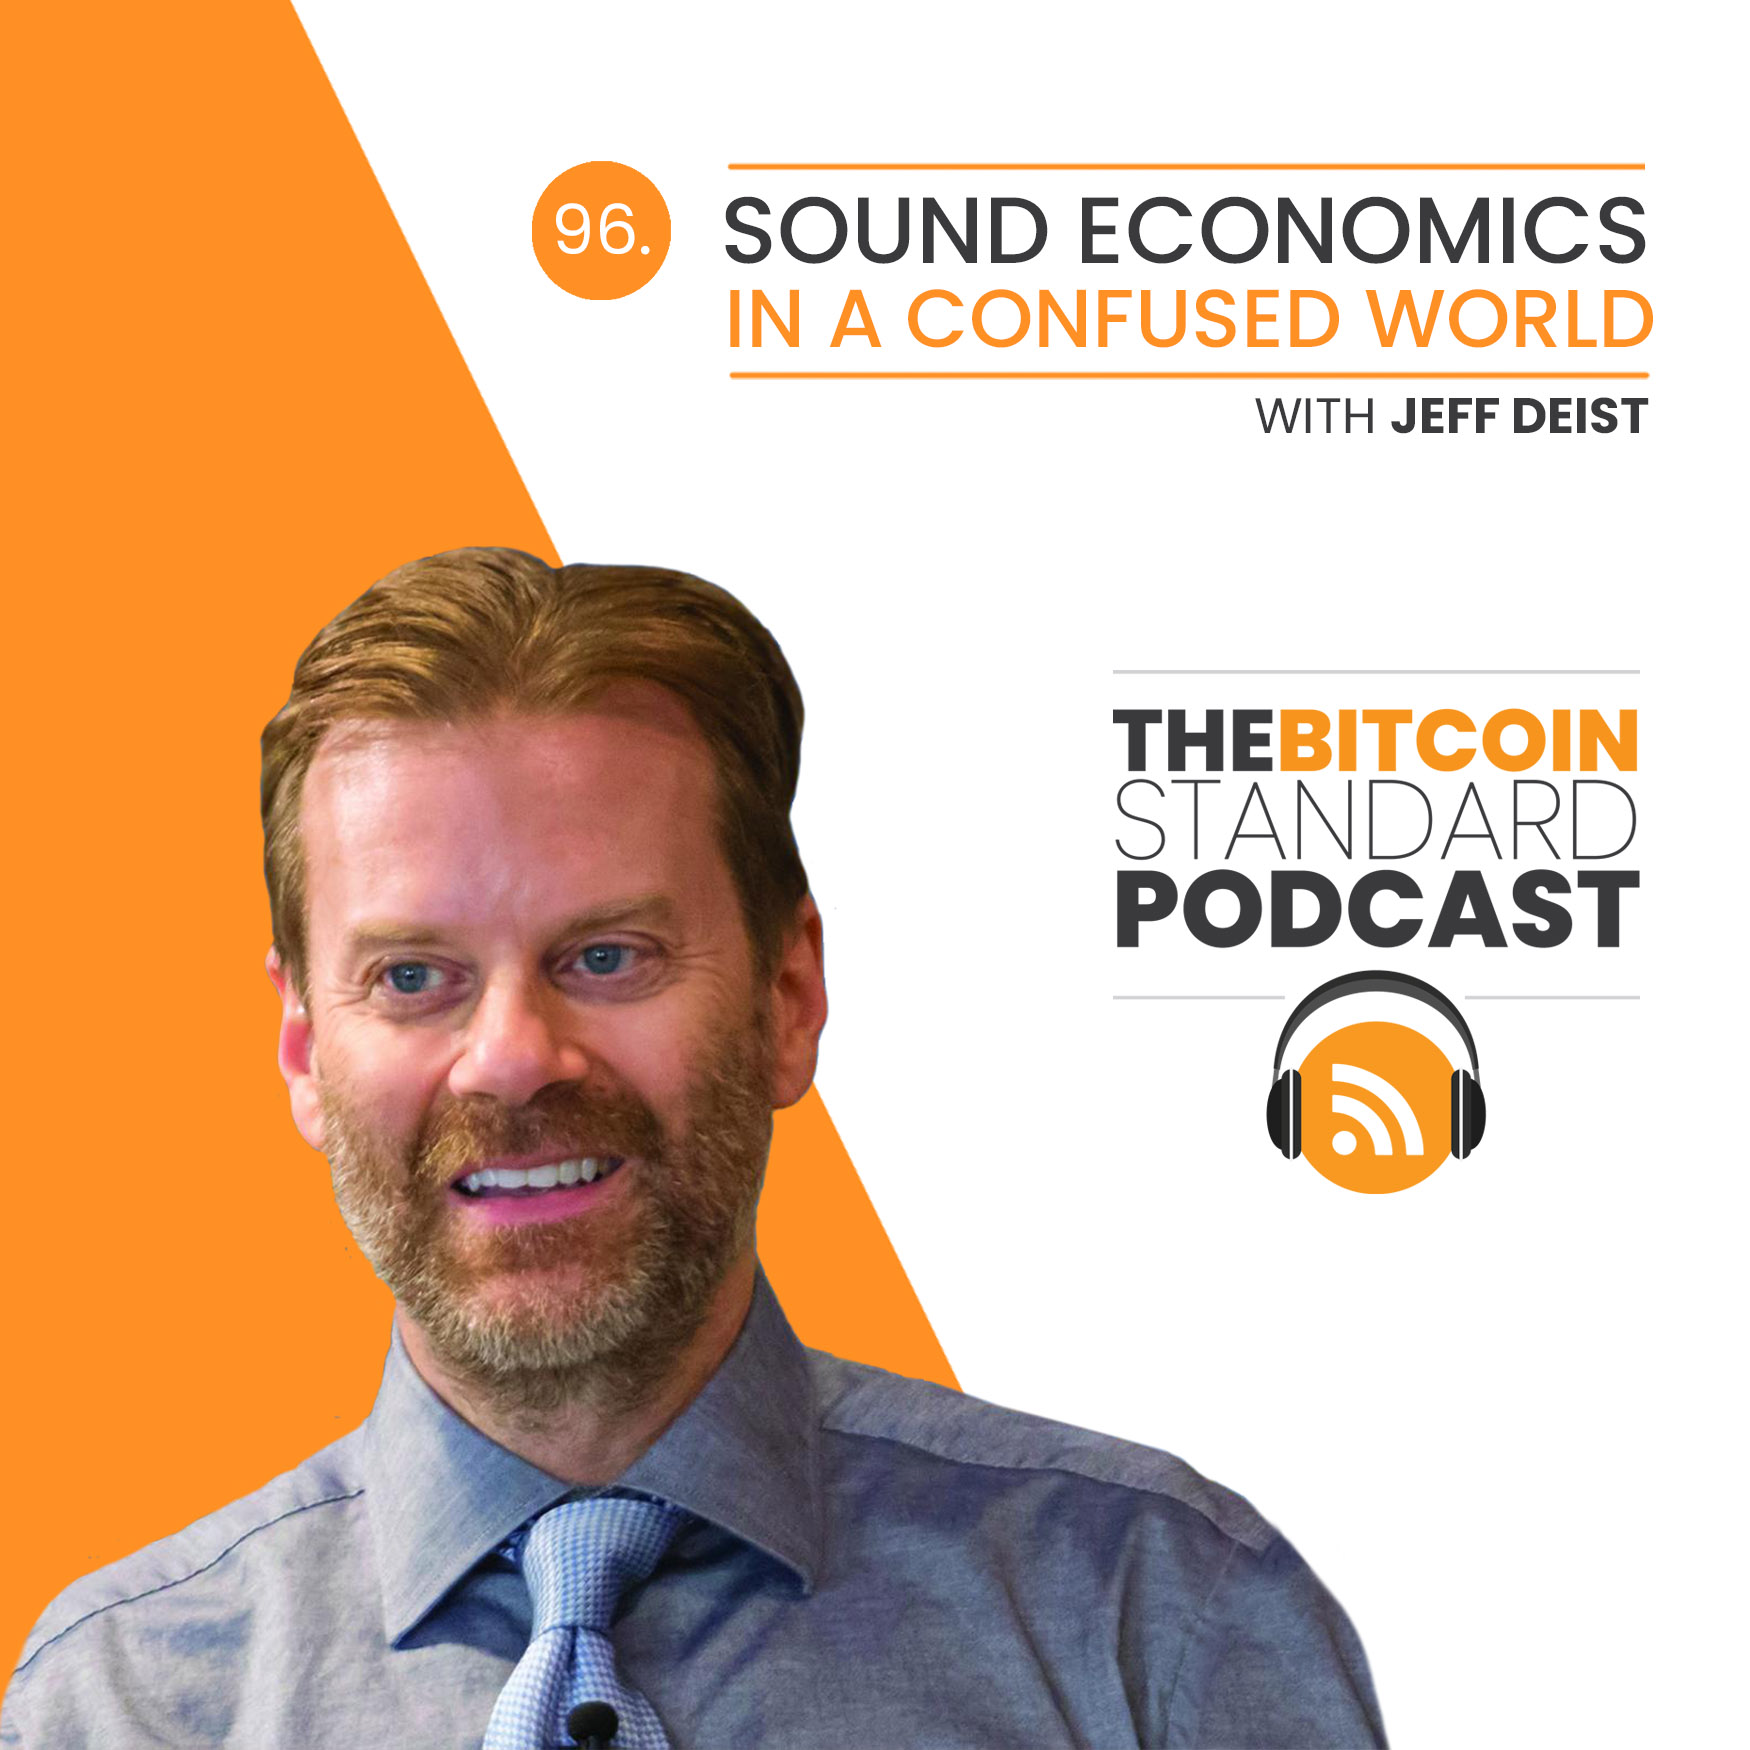 96. Sound Economics in a Confused World with Jeff Deist